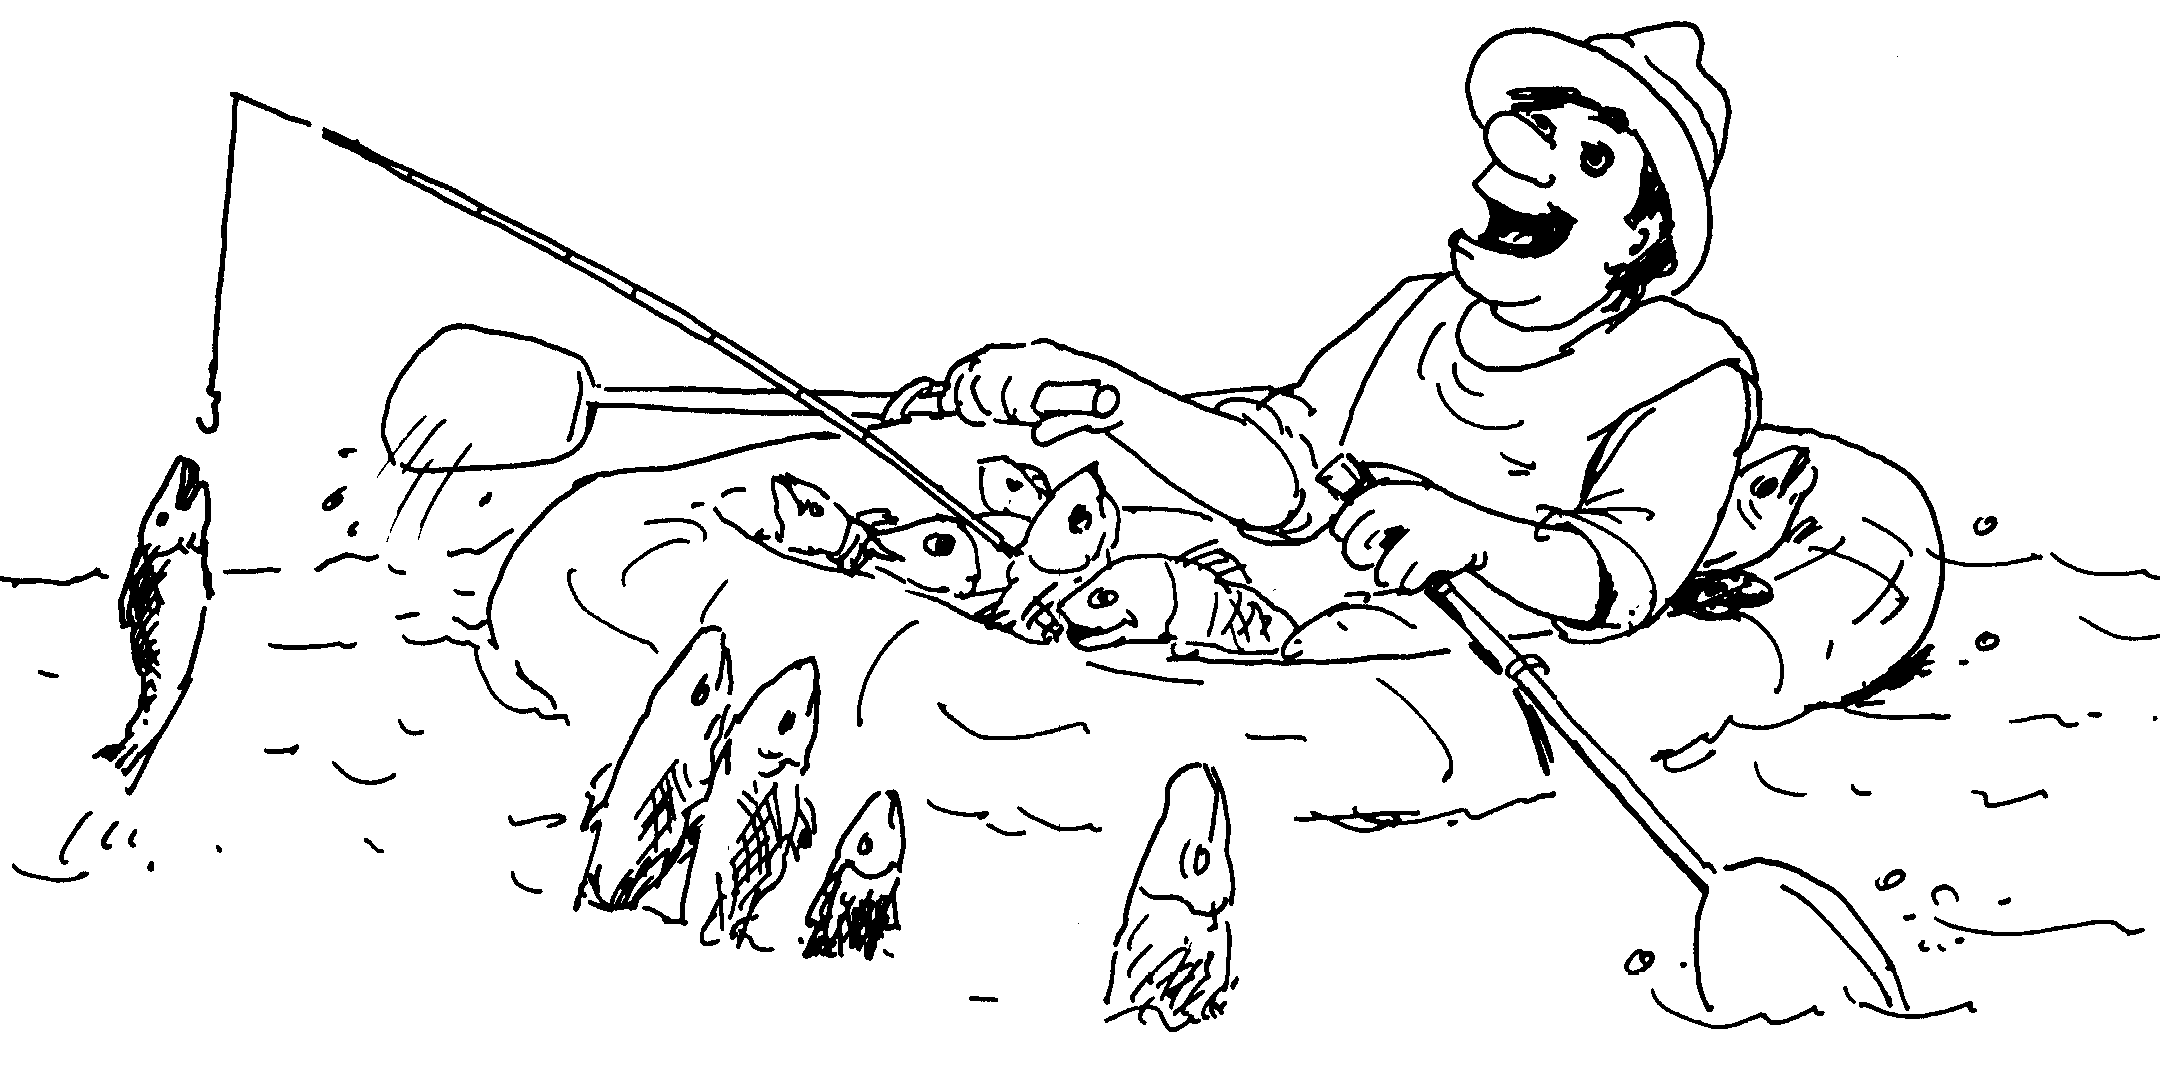  Fishing Coloring page | Coloring pages to print | Color Printing |